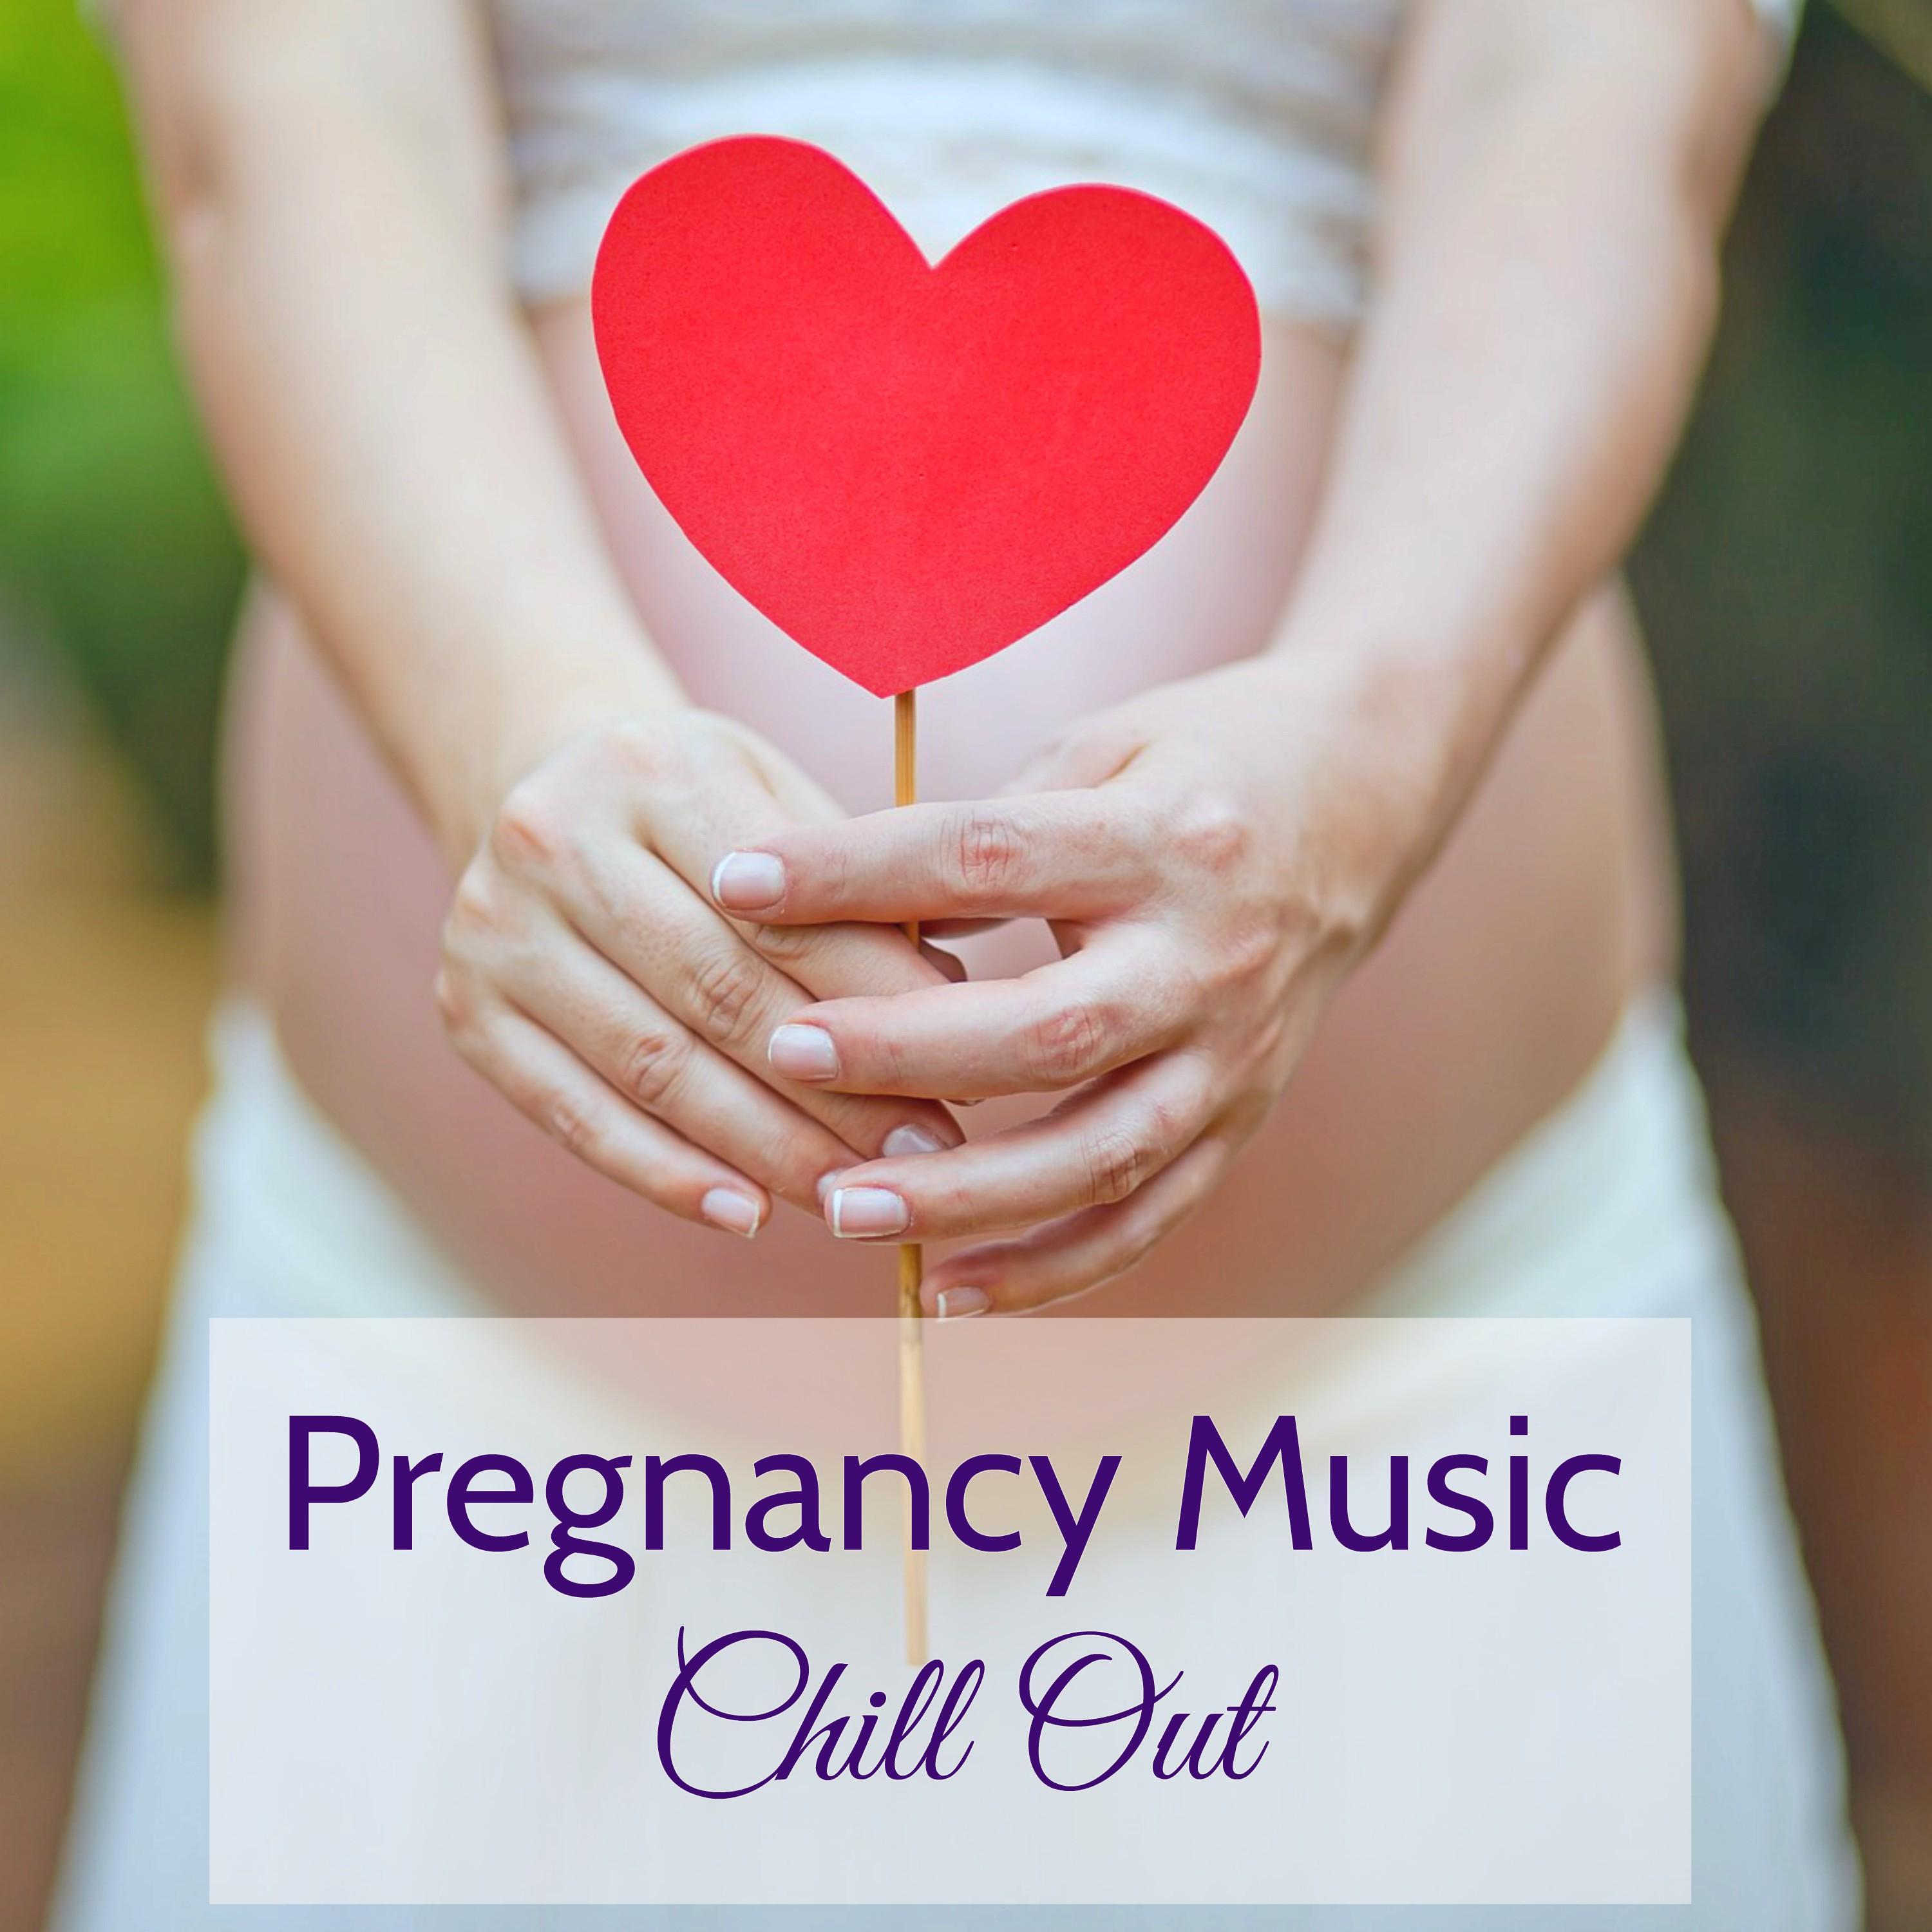 Relaxation (World Music for Pregnancy)